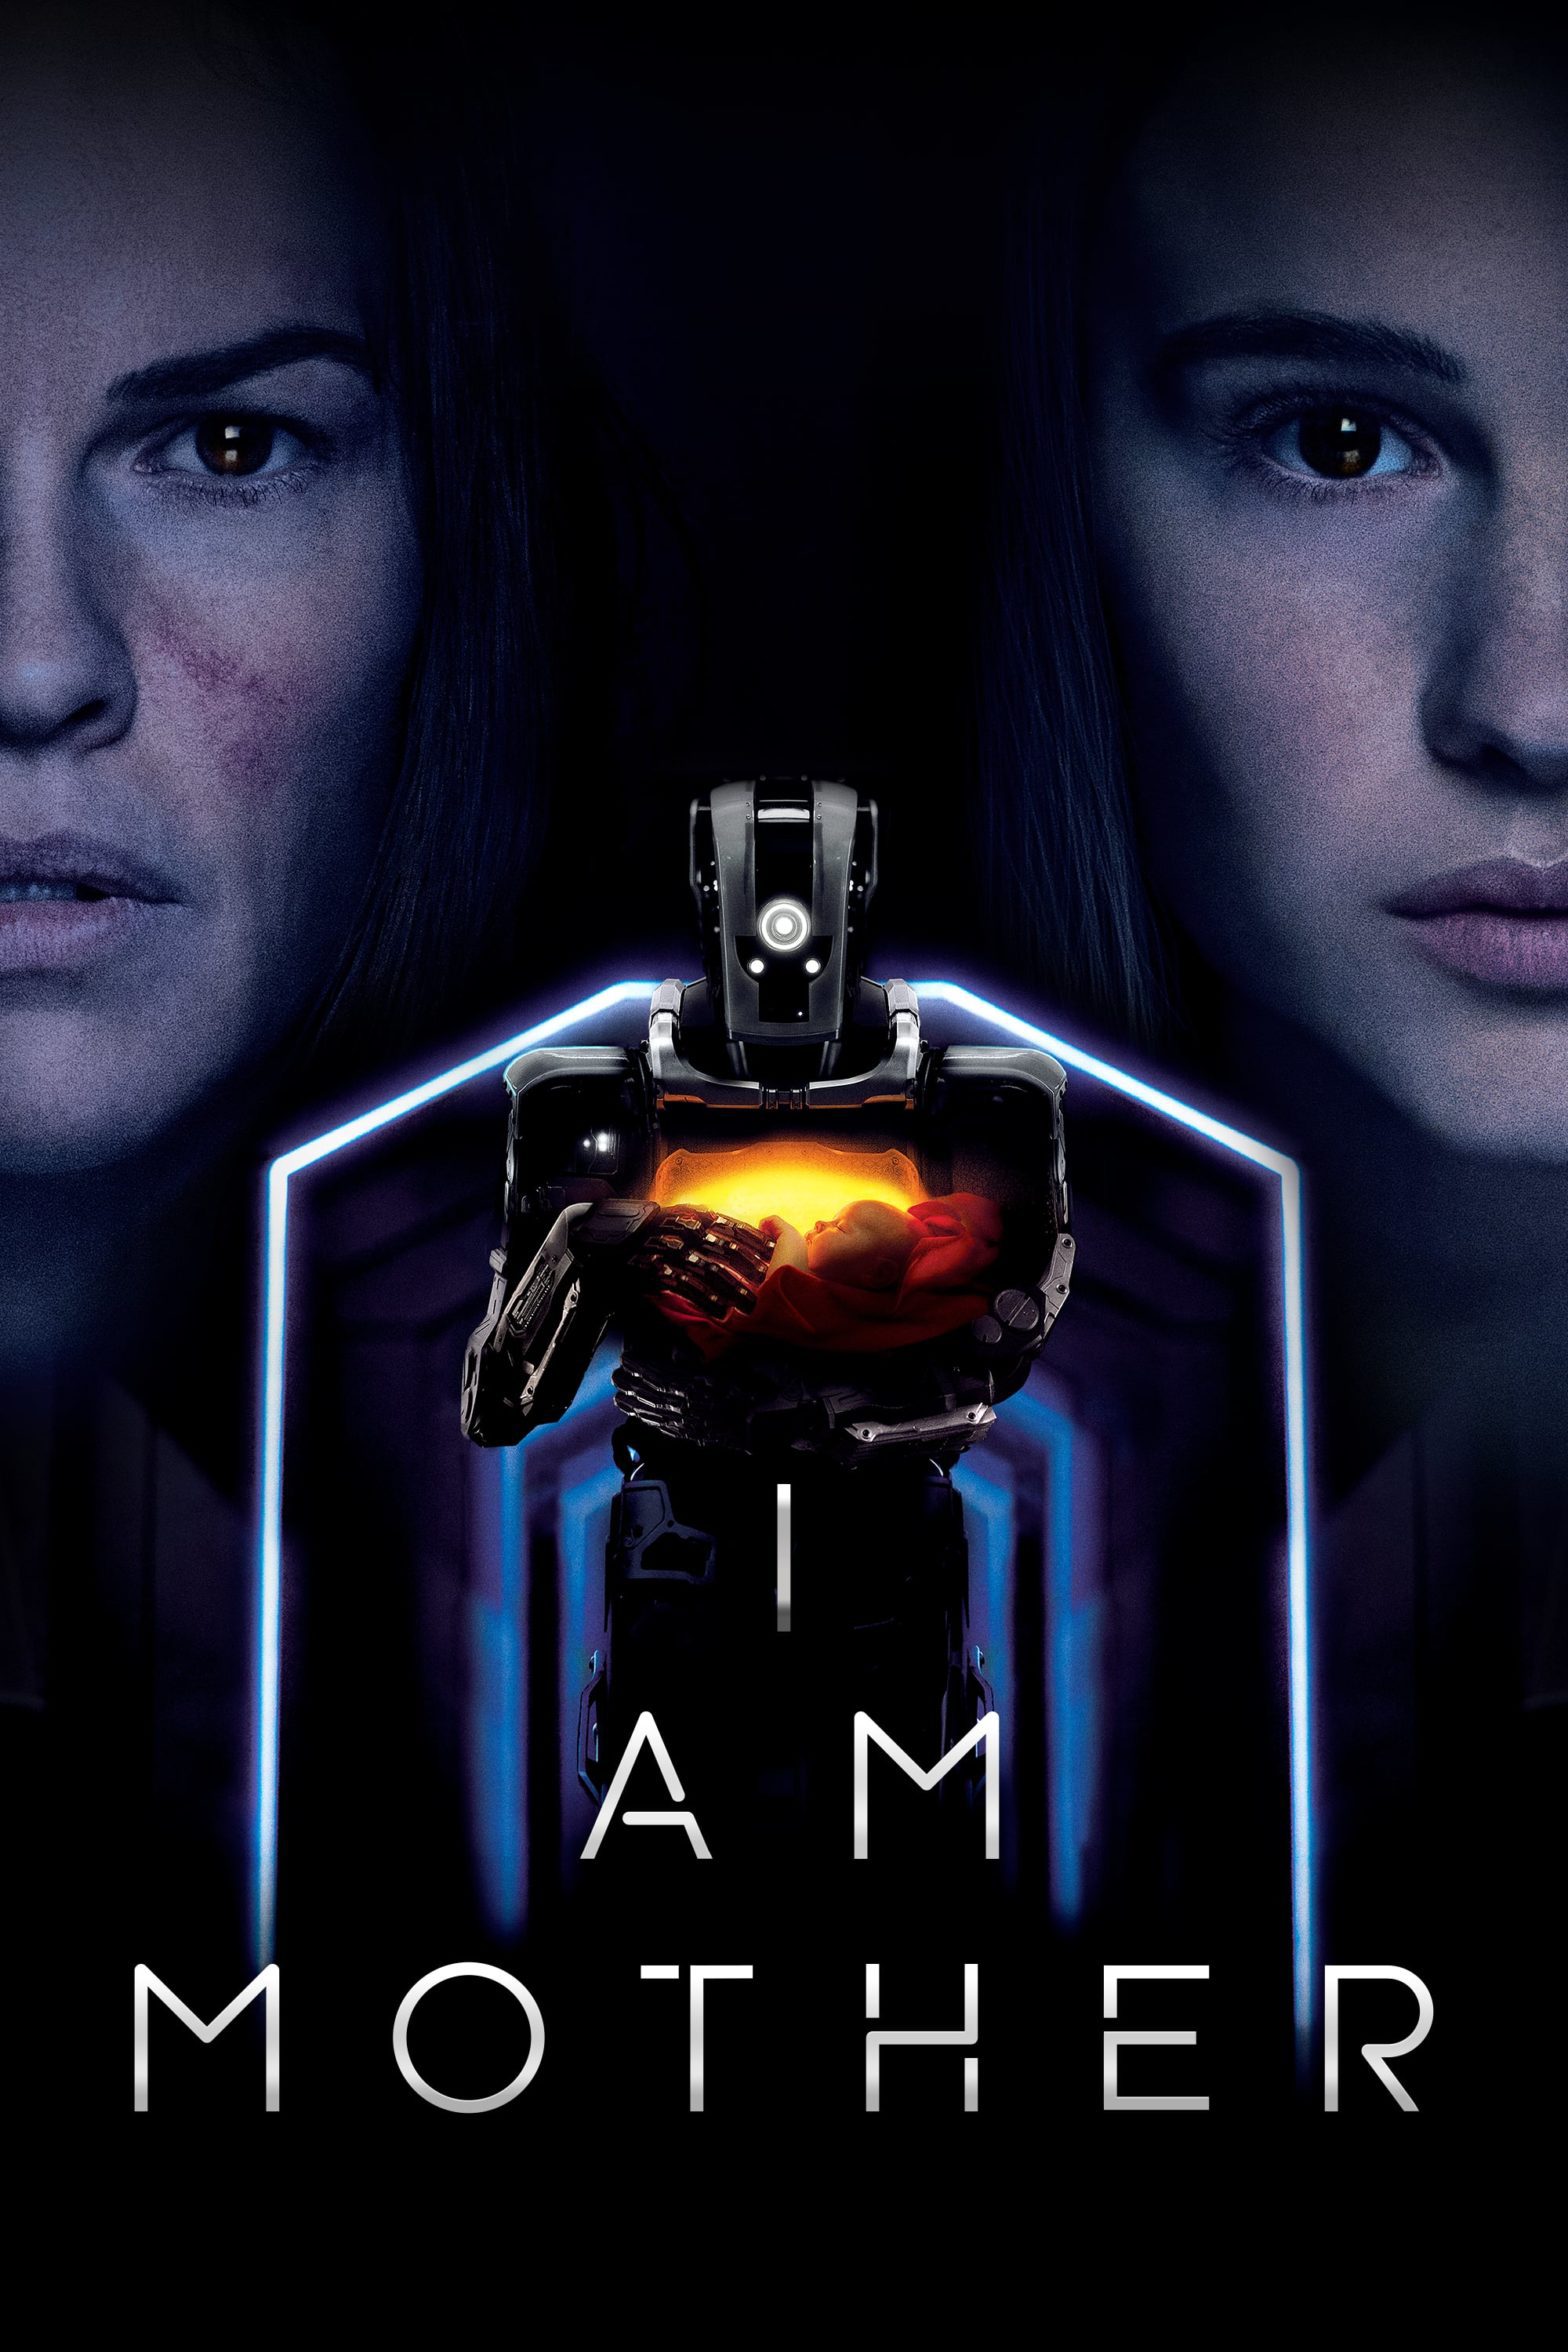 Poster for the movie "I Am Mother"